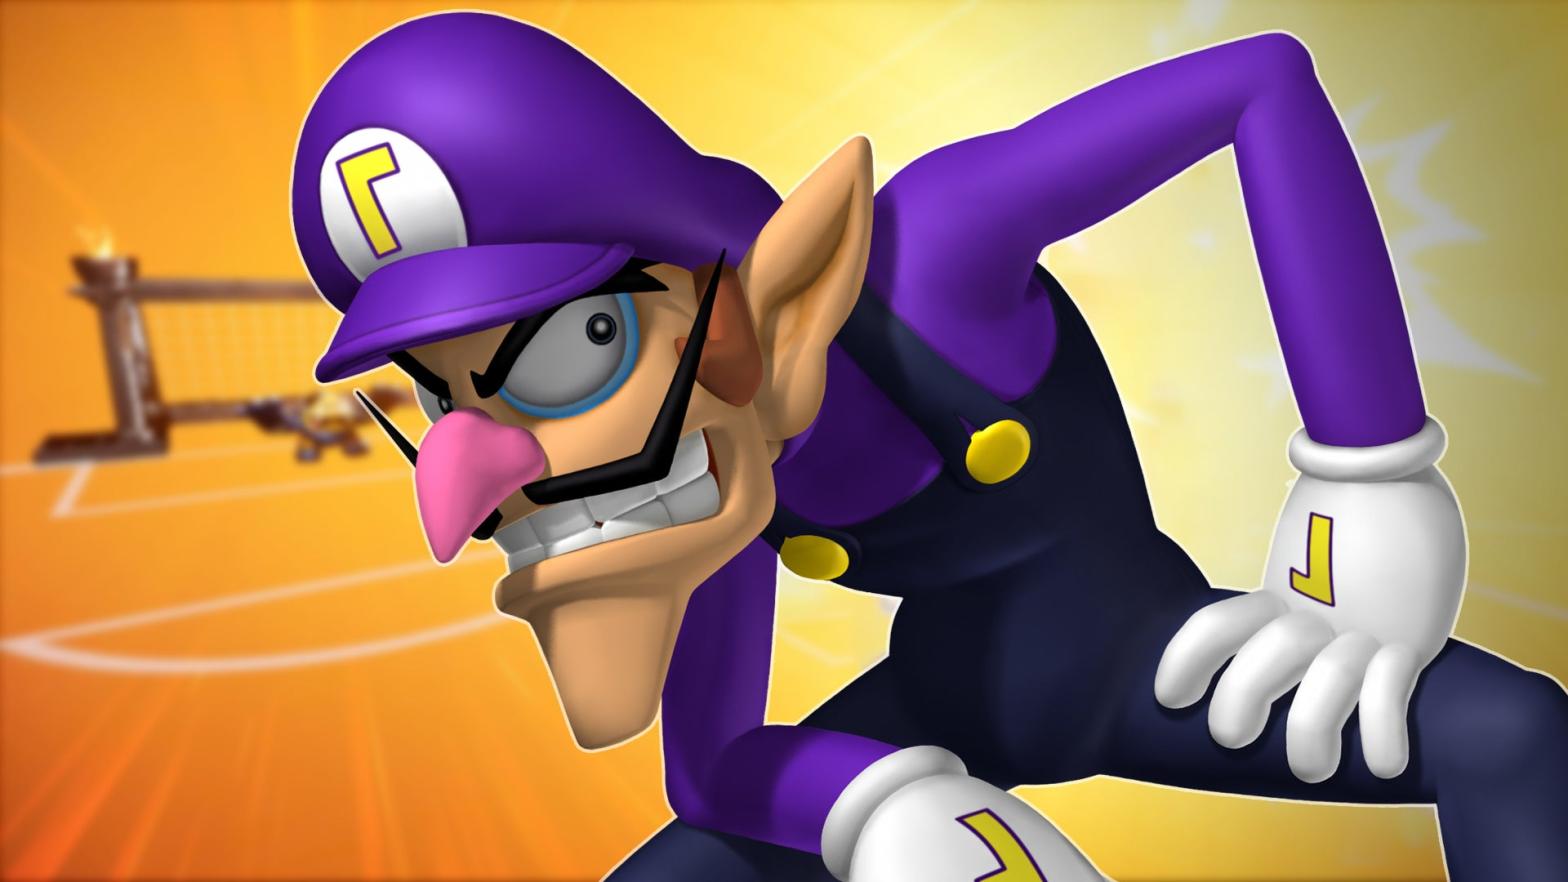 He's thinking about doing the crotch chop. You can see it in his eyes.  (Image: Nintendo / Kotaku)